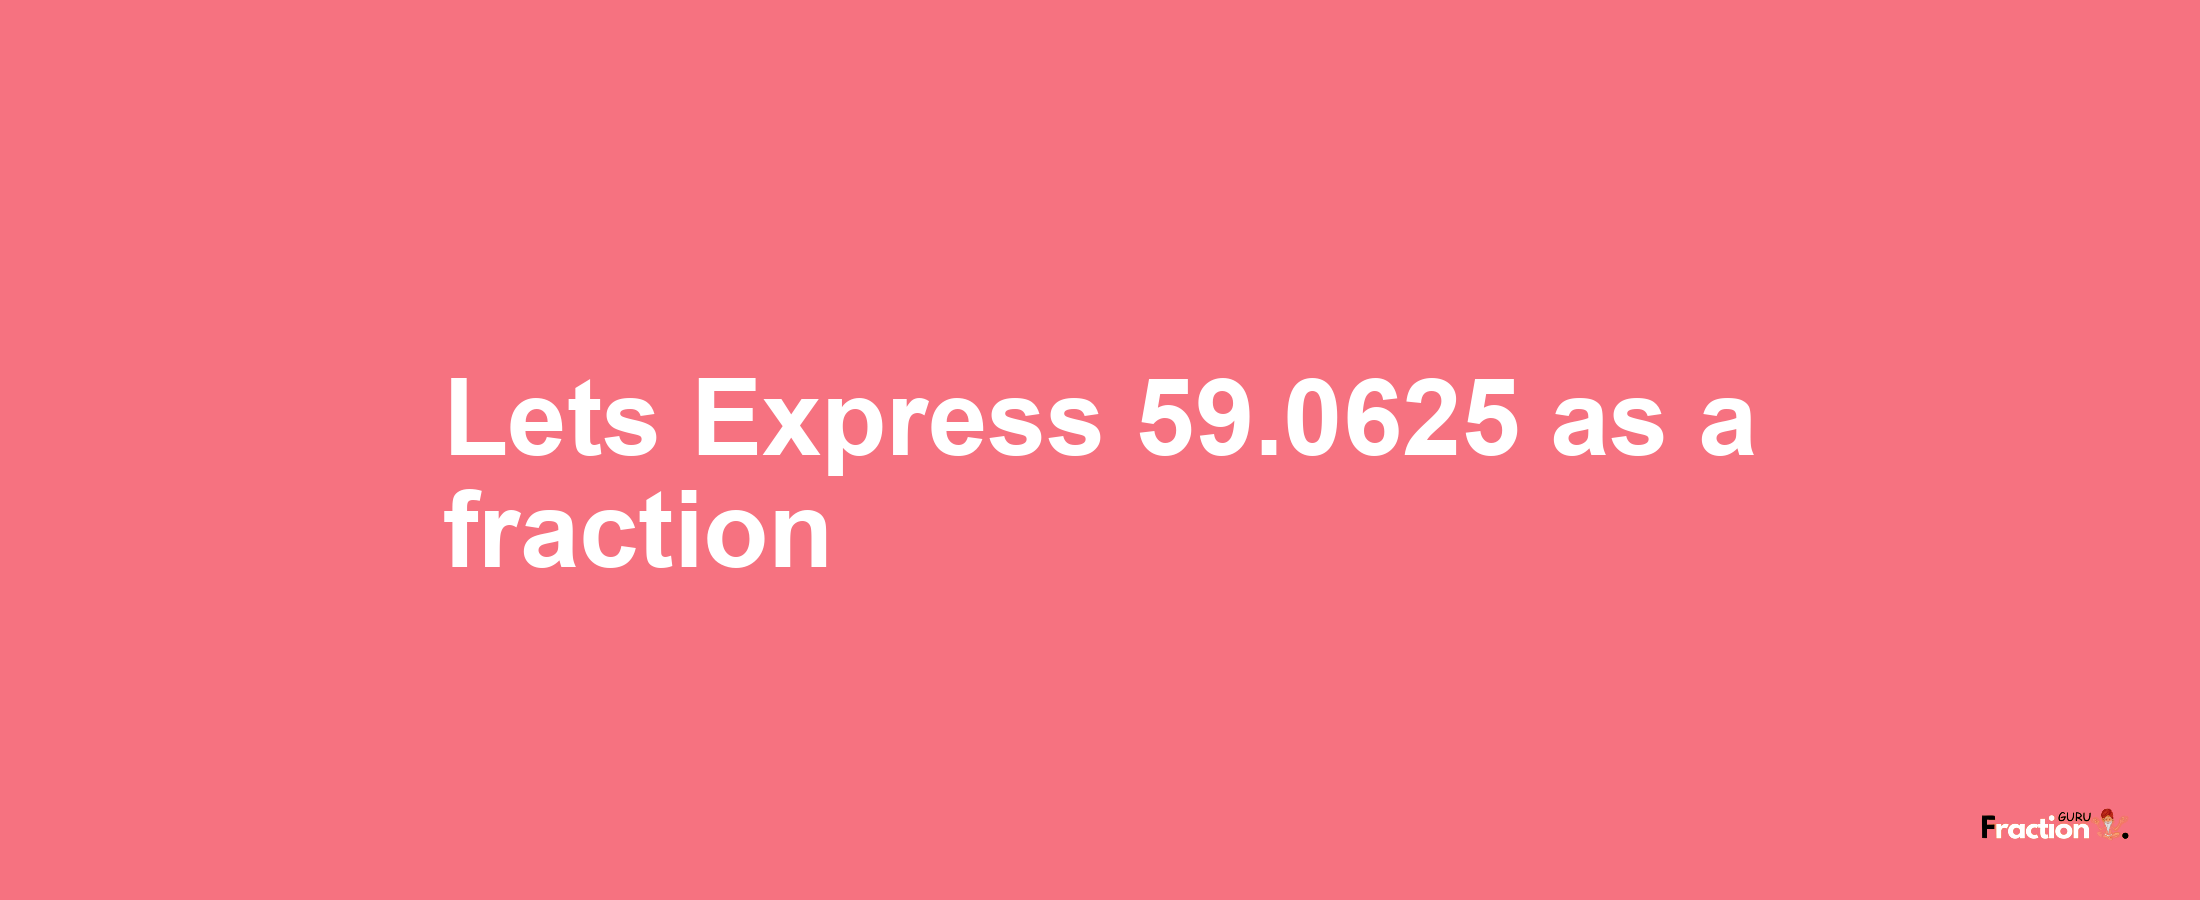 Lets Express 59.0625 as afraction